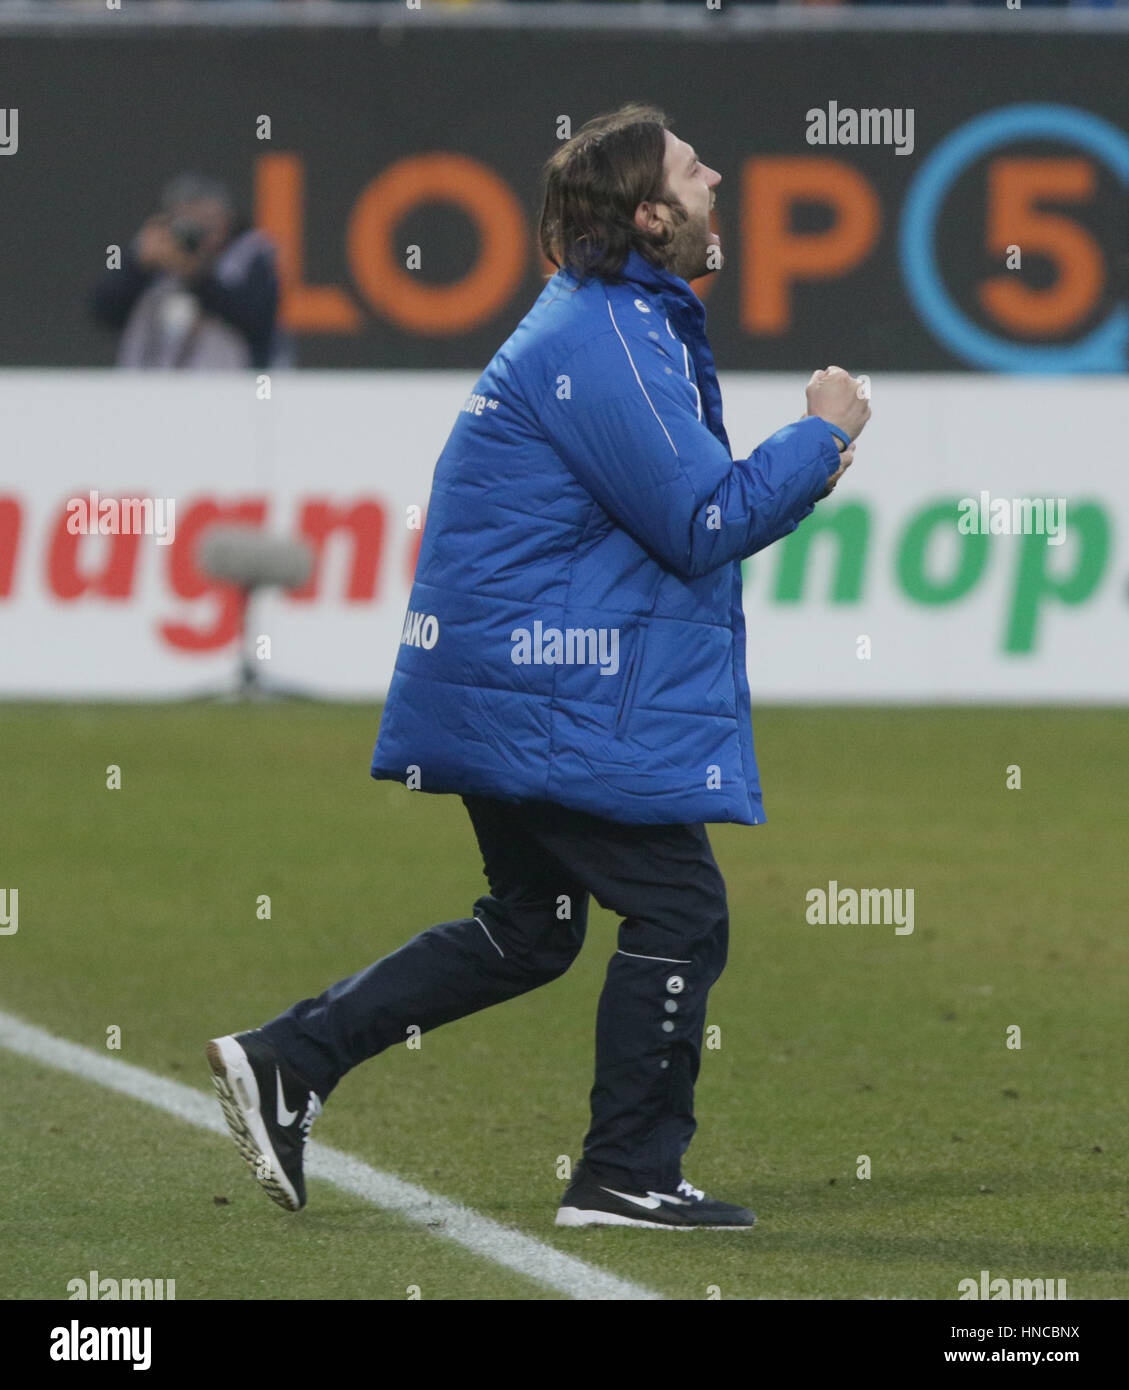 Darmstadt, Germany. 11th Feb, 2017. Darmstadt's coach Torsten Frings celebrates the 2:1 win after the final whistle of the German Bundesliga soccer match between Darmstadt 98 and Borussia Dortmund at the Jonathan Heimes stadium in Darmstadt, Germany, 11 February 2017. Photo: Frank Rumpenhorst/dpa/Alamy Live News Stock Photo